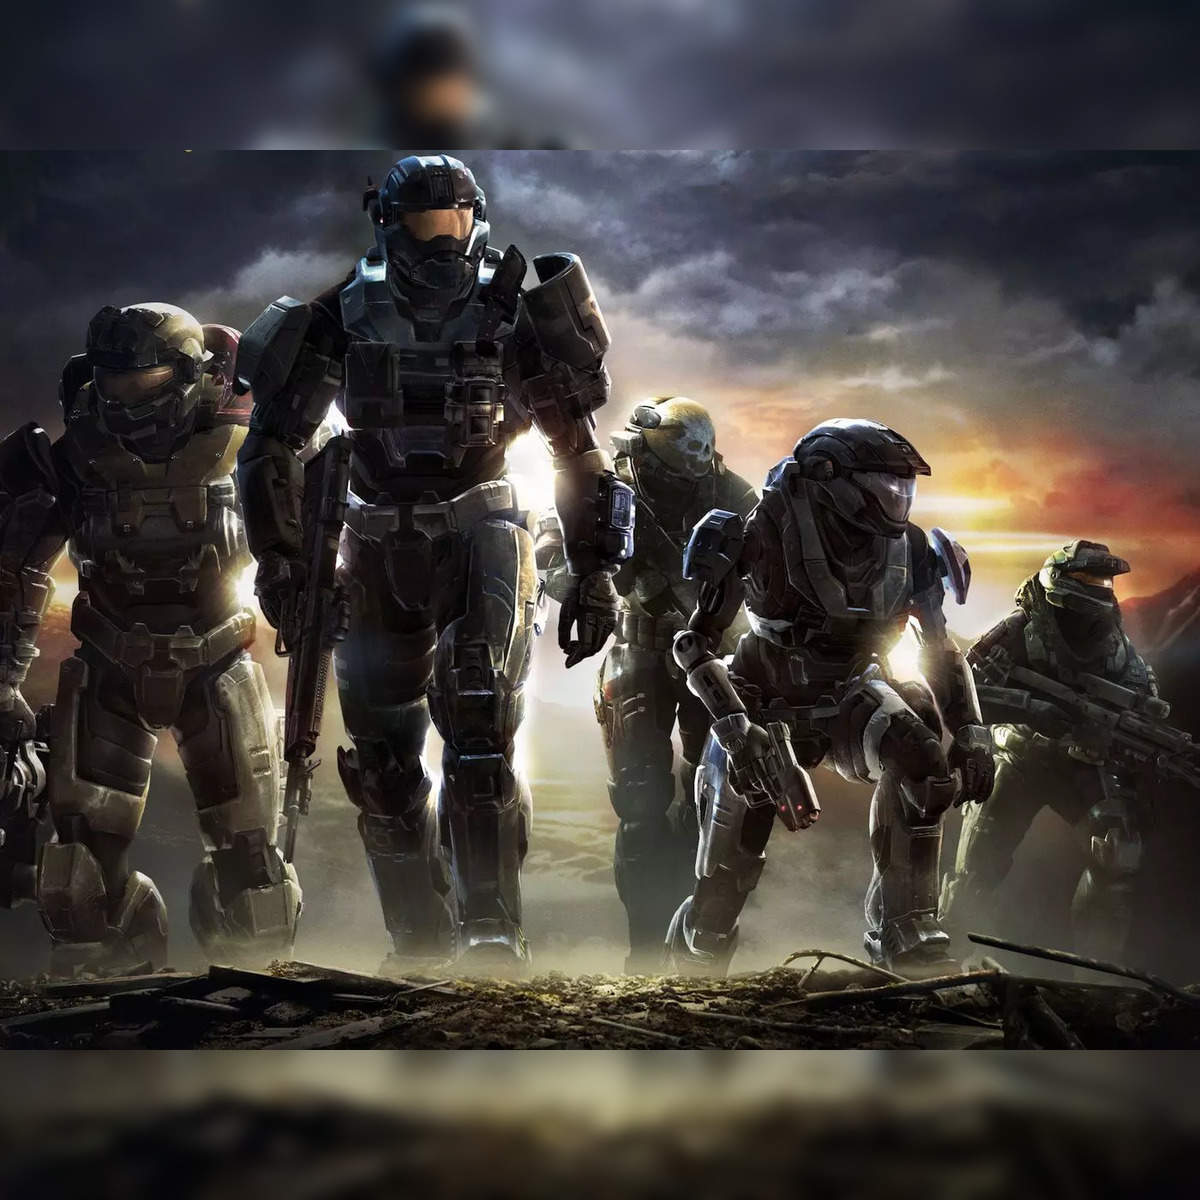 Halo season 2: Halo Season 2 release date accidentally revealed? Paramount+  slip-up sparks speculation - The Economic Times